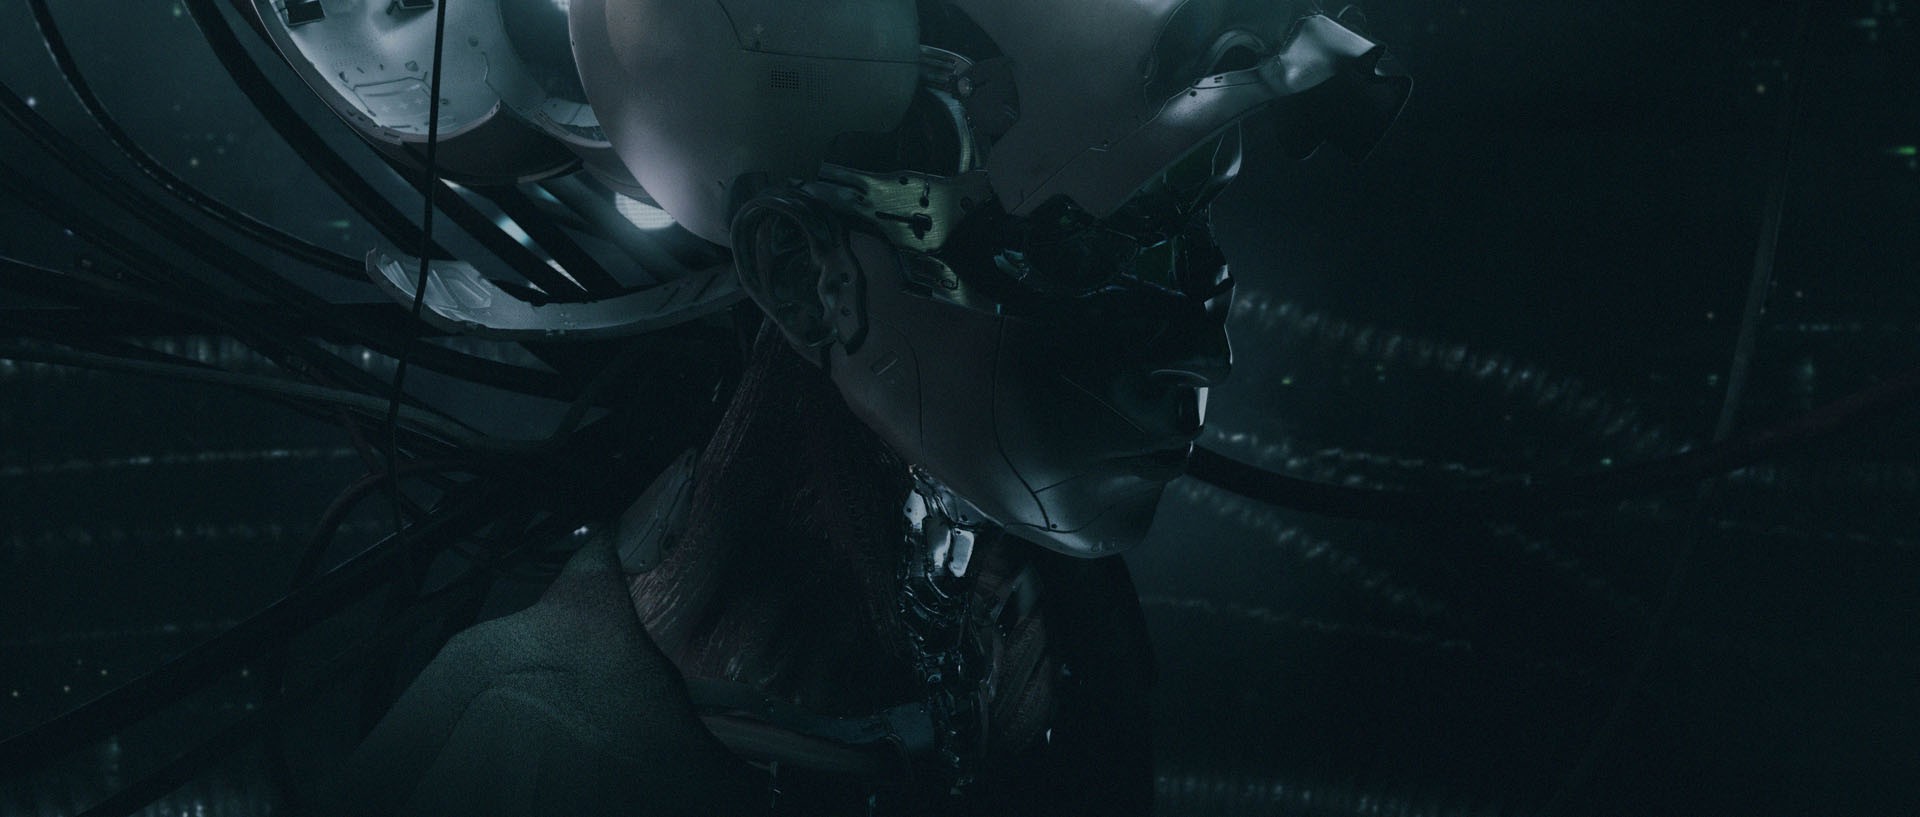 ghost in the shell wallpaper hd,darkness,screenshot,fictional character,cg artwork,personal protective equipment